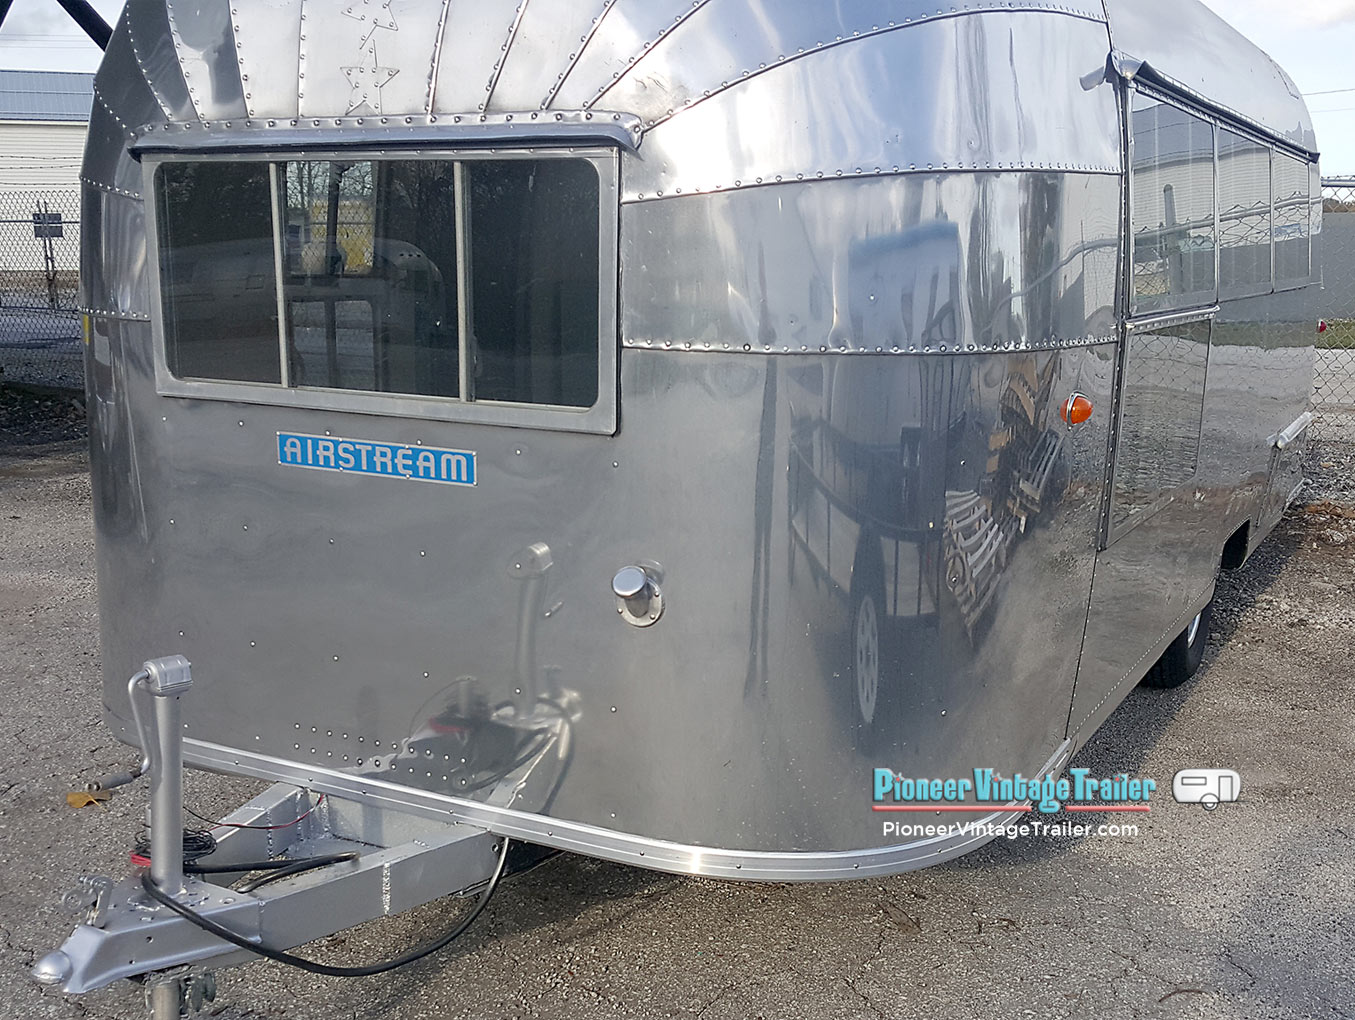 1957 Airstream Caravanner restored with new front panels